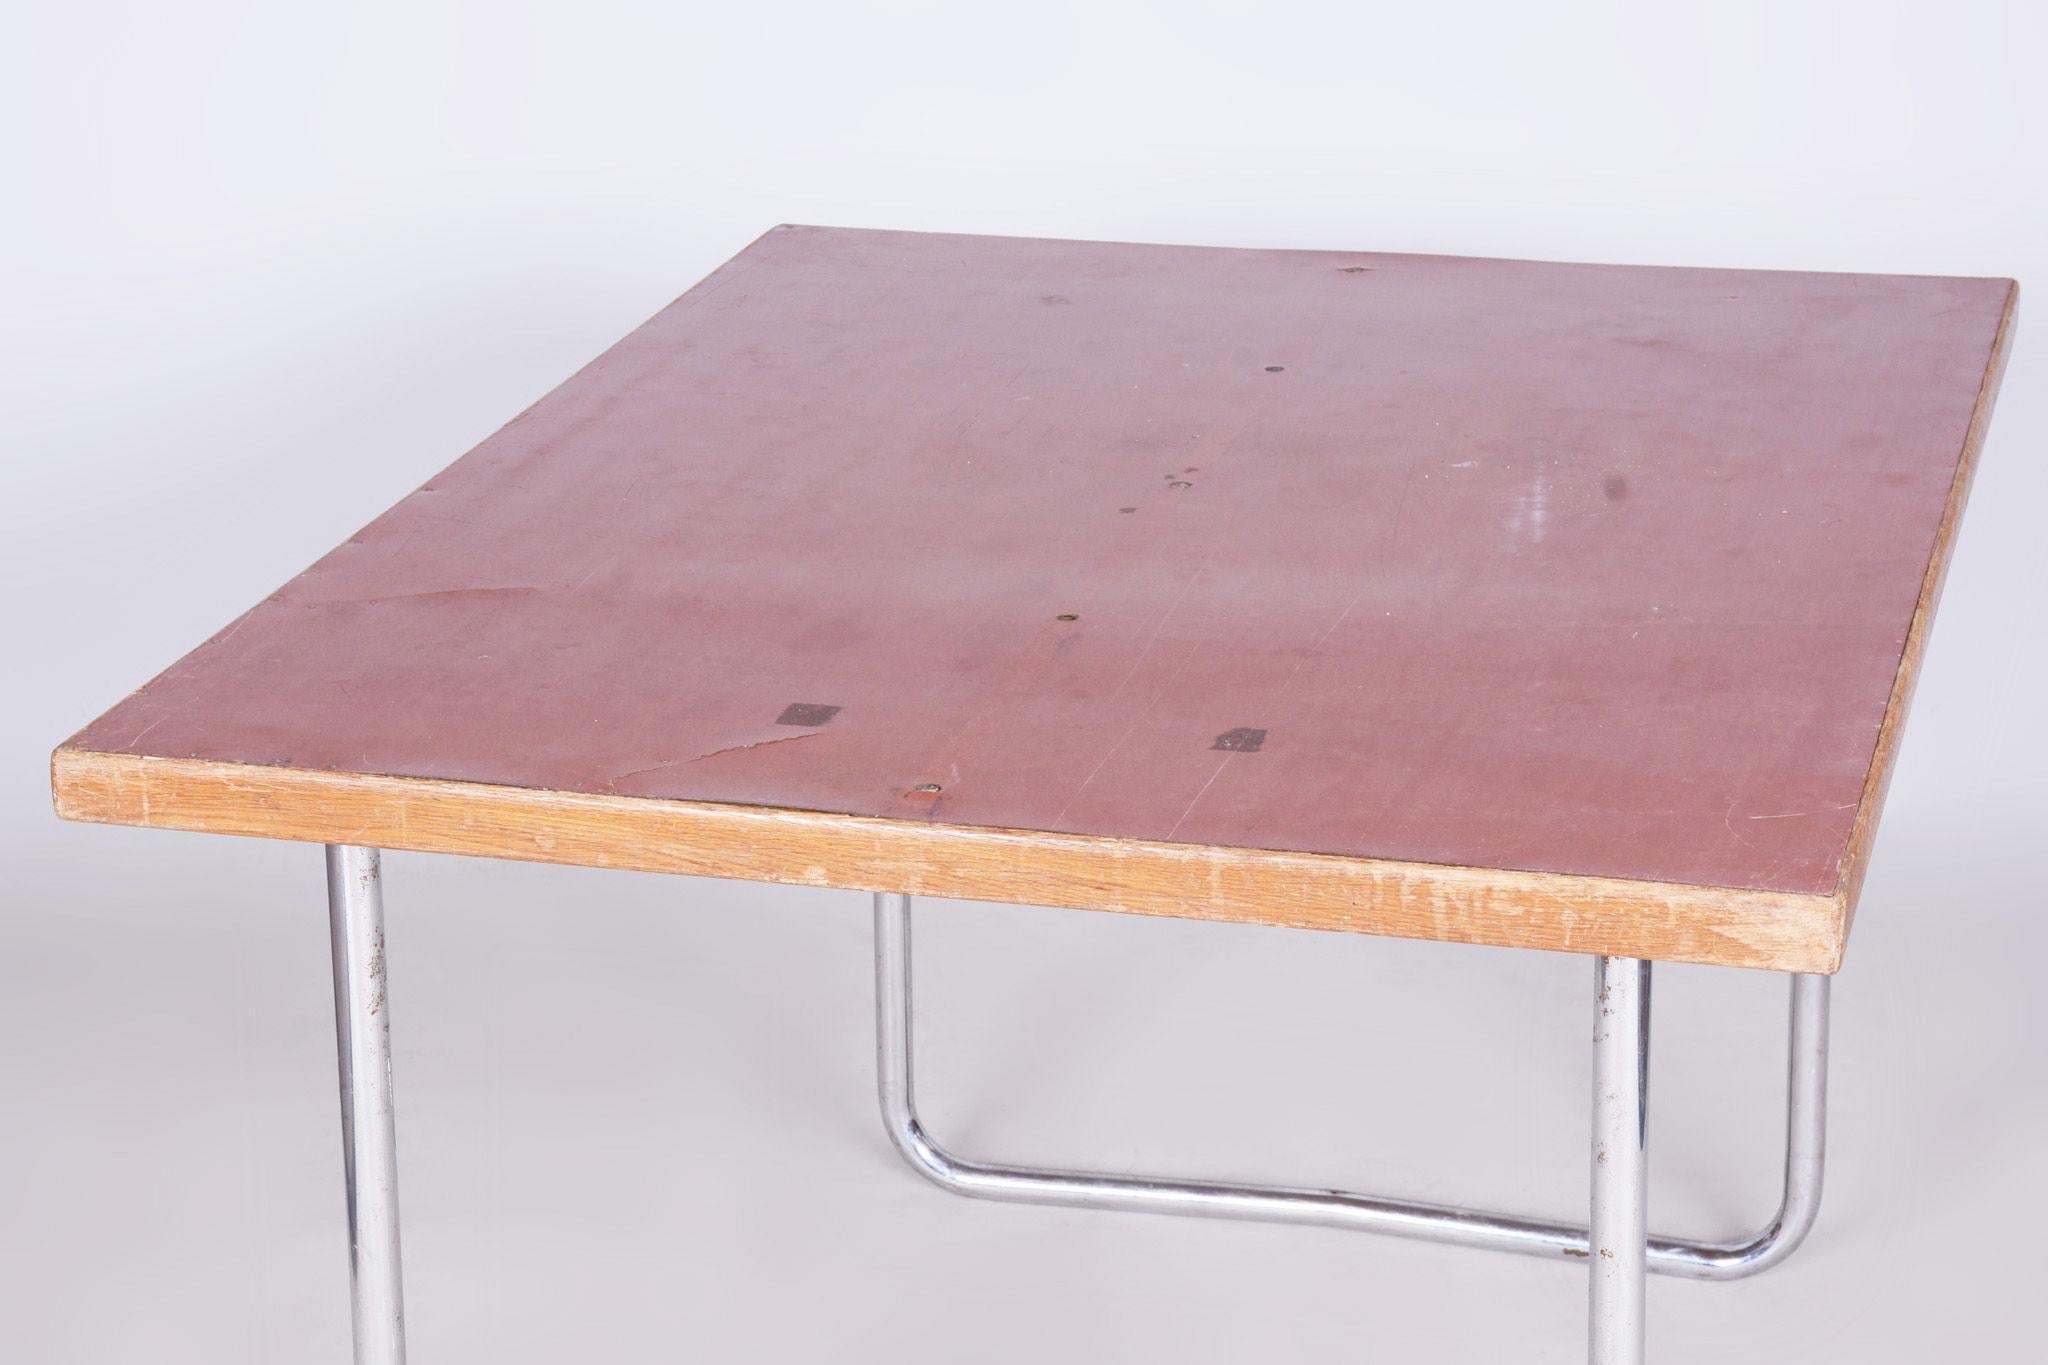 Original Bauhaus Dining Table, by Mücke - Melder, Well Preserved, Czech, 1930s For Sale 1